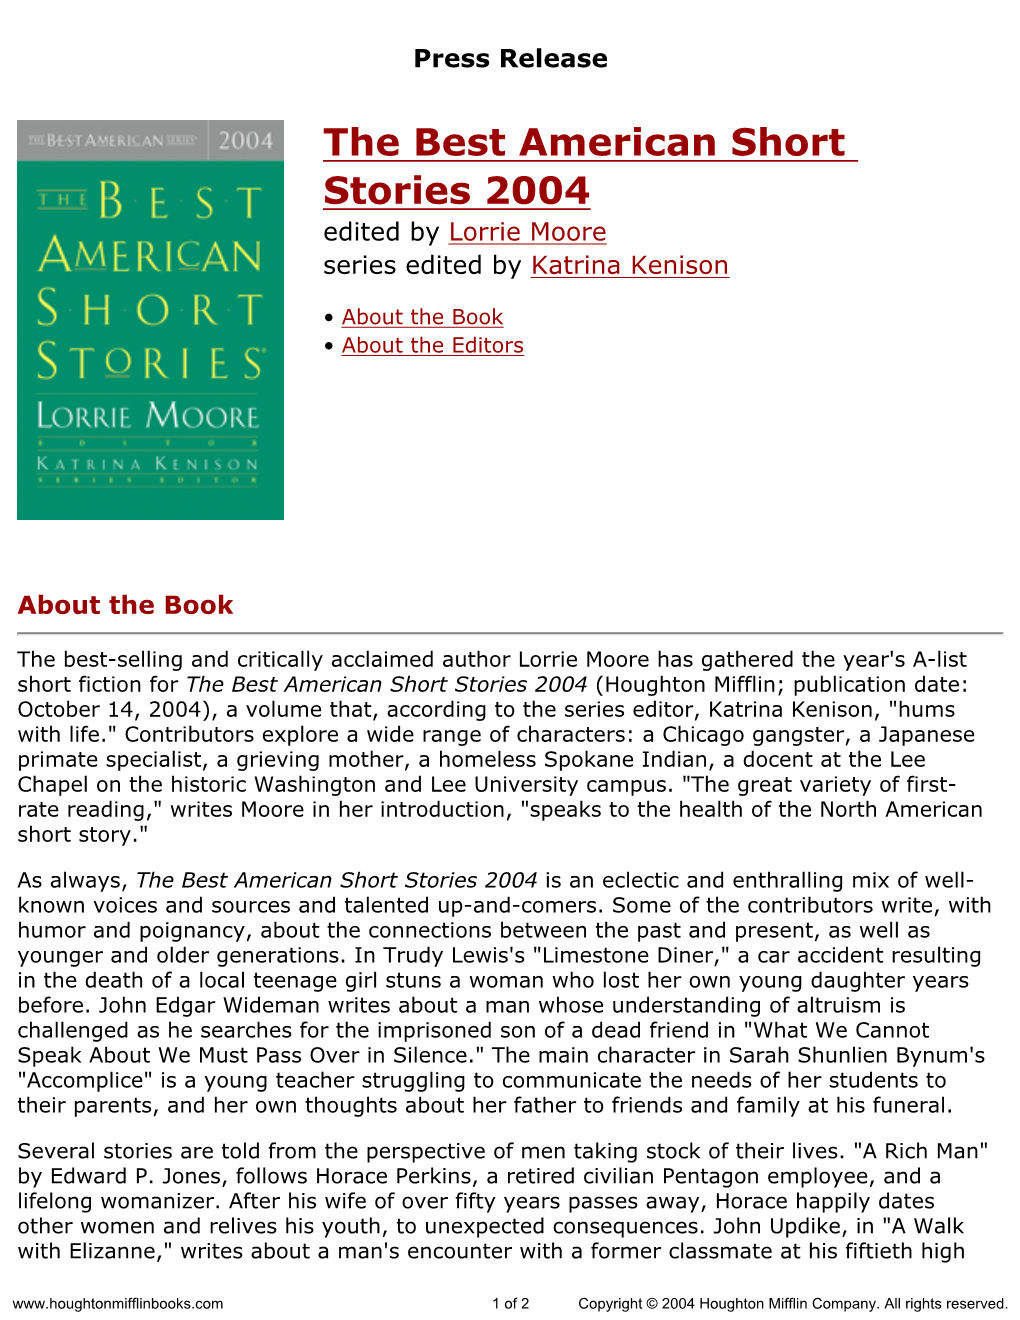 Press Release for the Best American Short Stories 2004 Edited by Lorrie